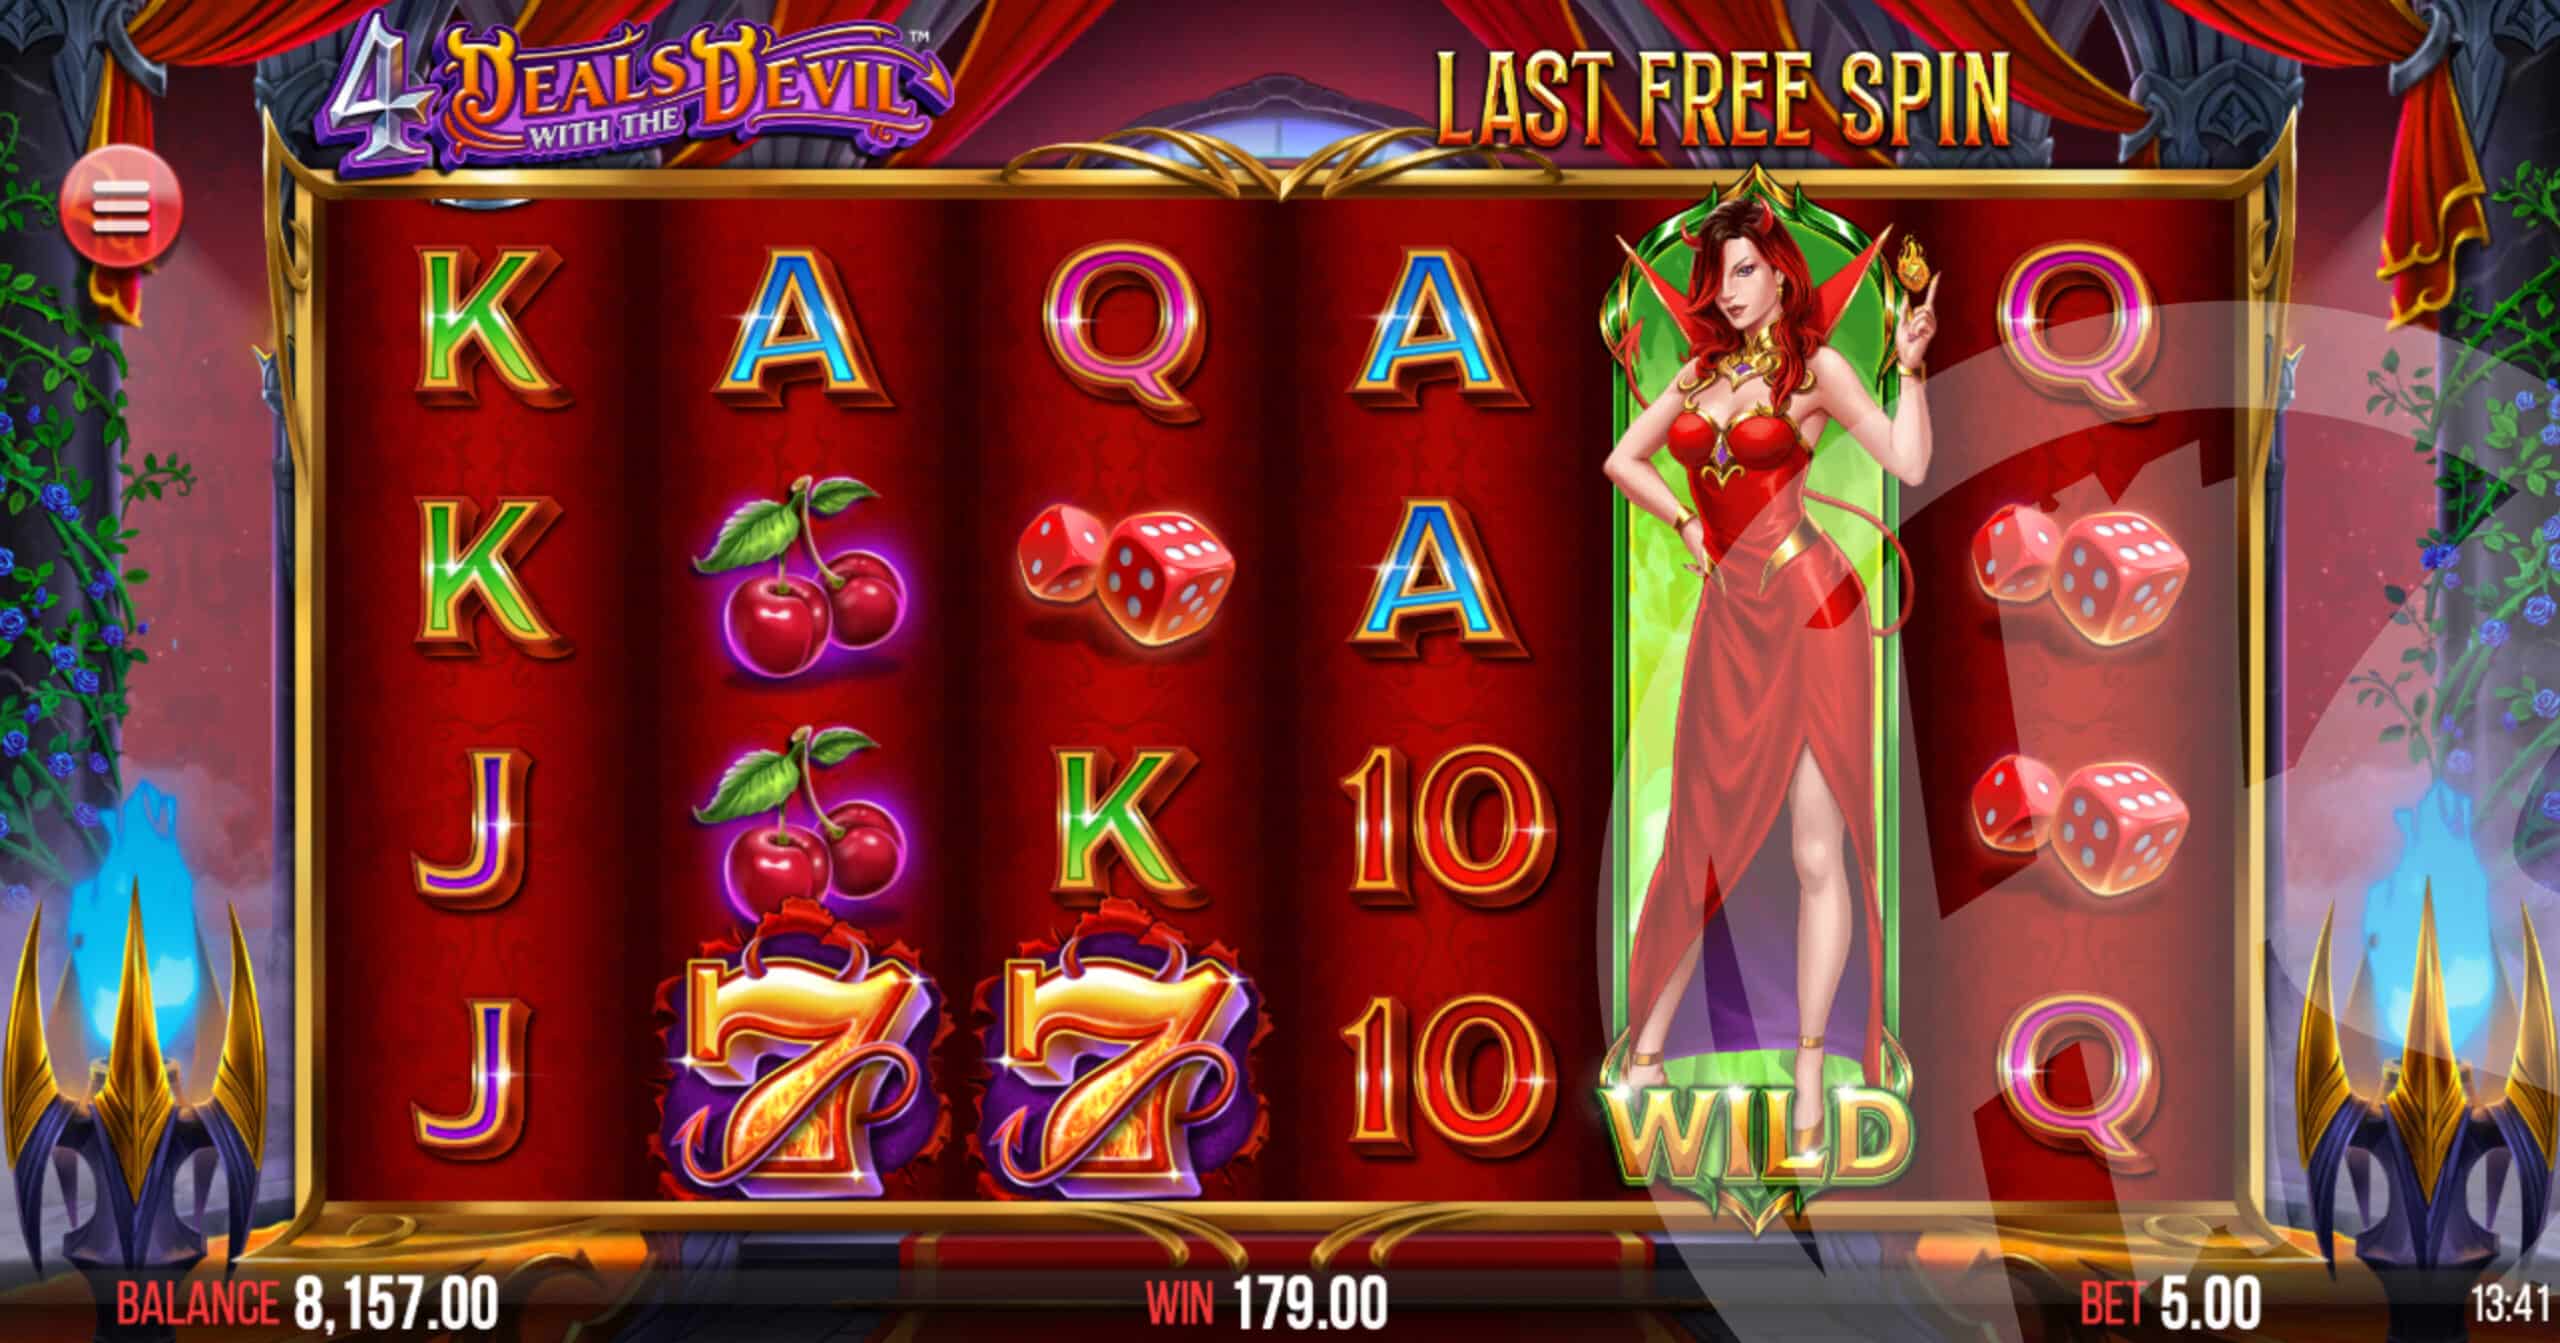 4 Deals With The Devil Cool Free Spins